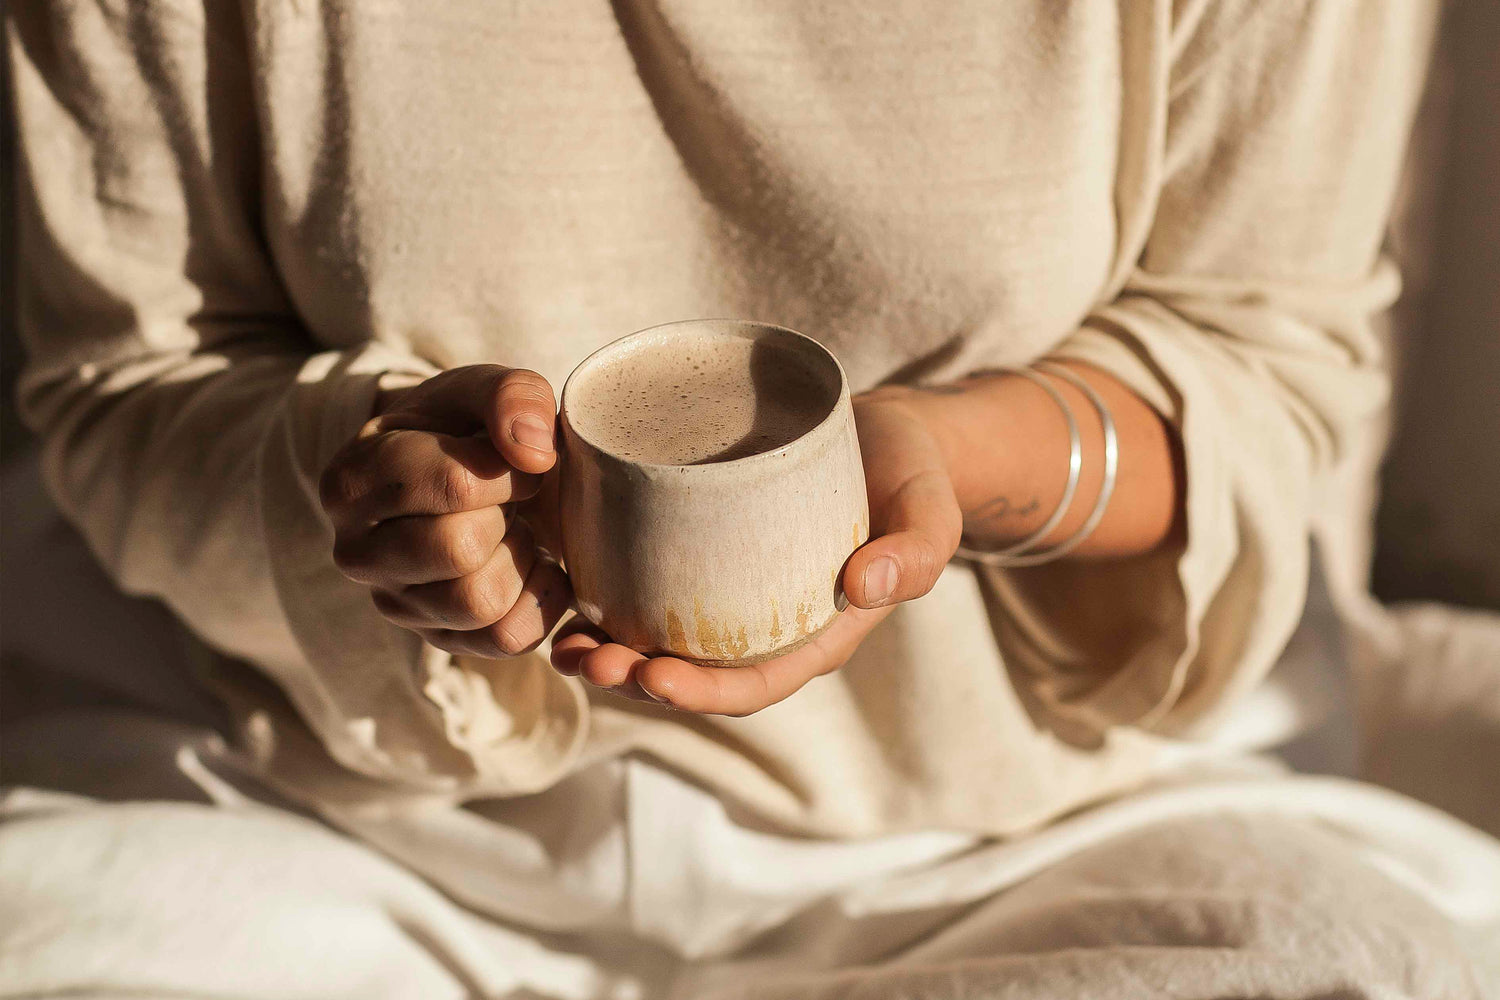 A close up shot of a woman from the torso down, wearing linen clothes and holding a cup of warm liquid in a coffee mug